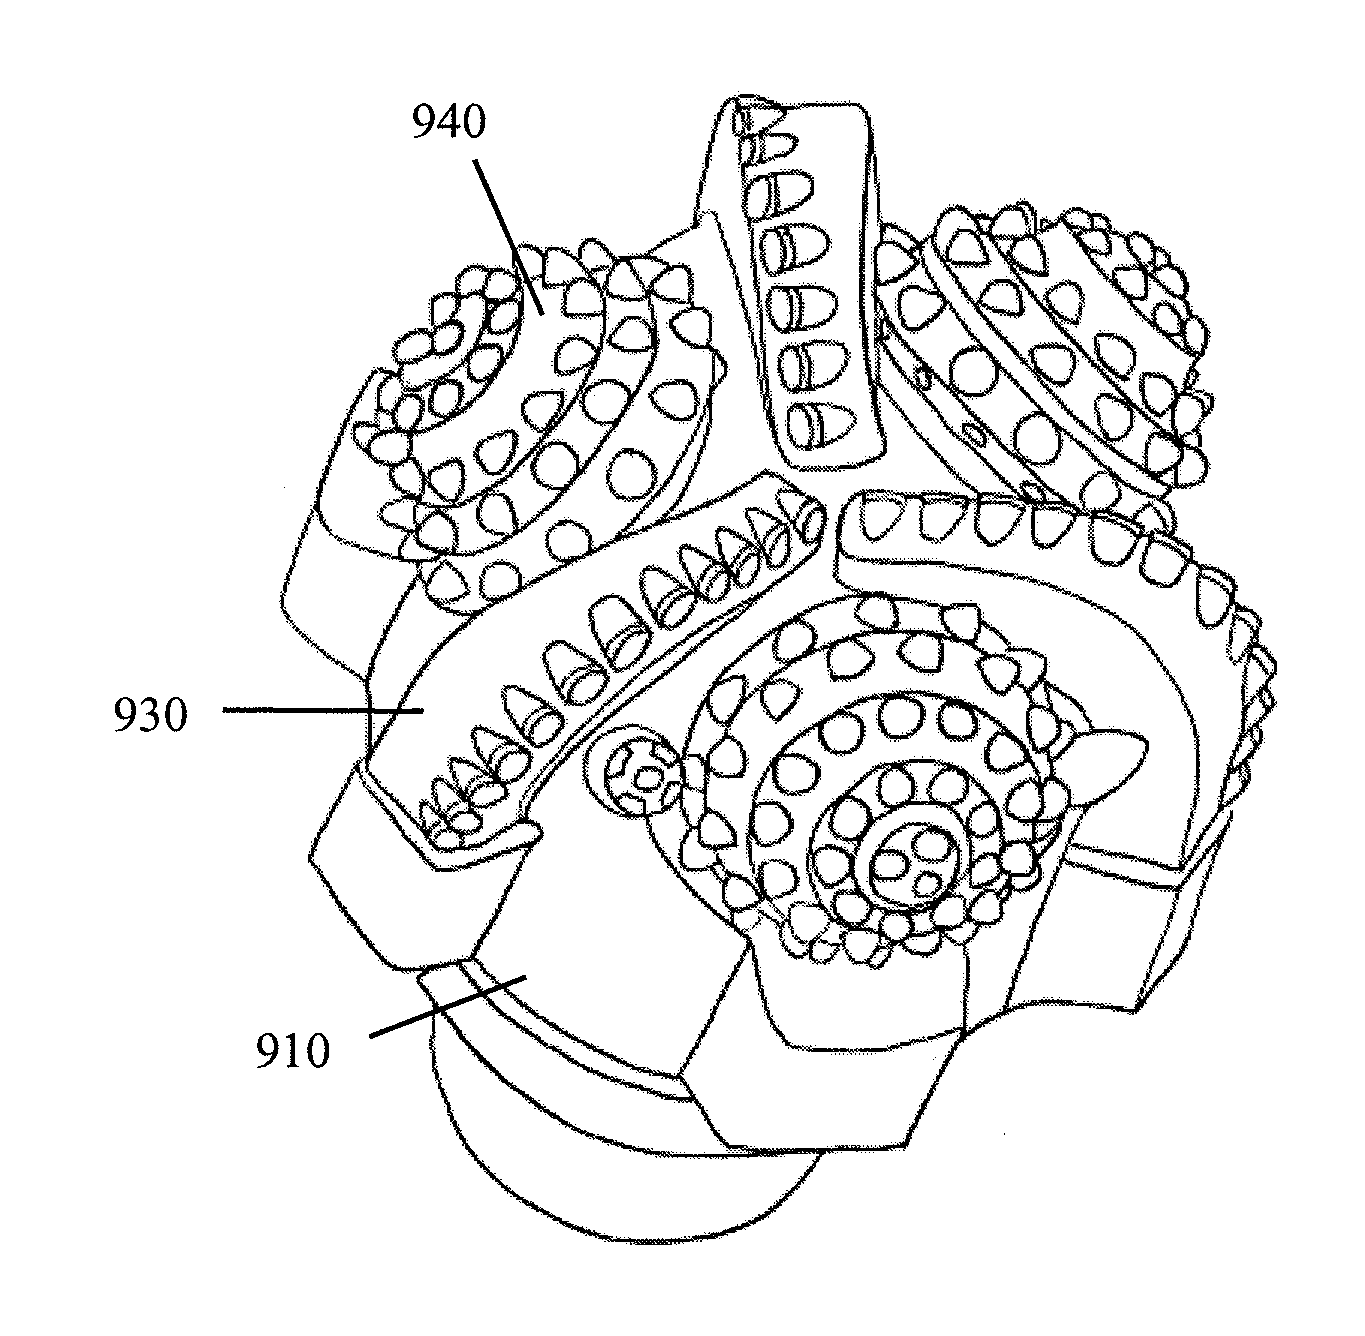 High-shear roller cone and pdc hybrid bit